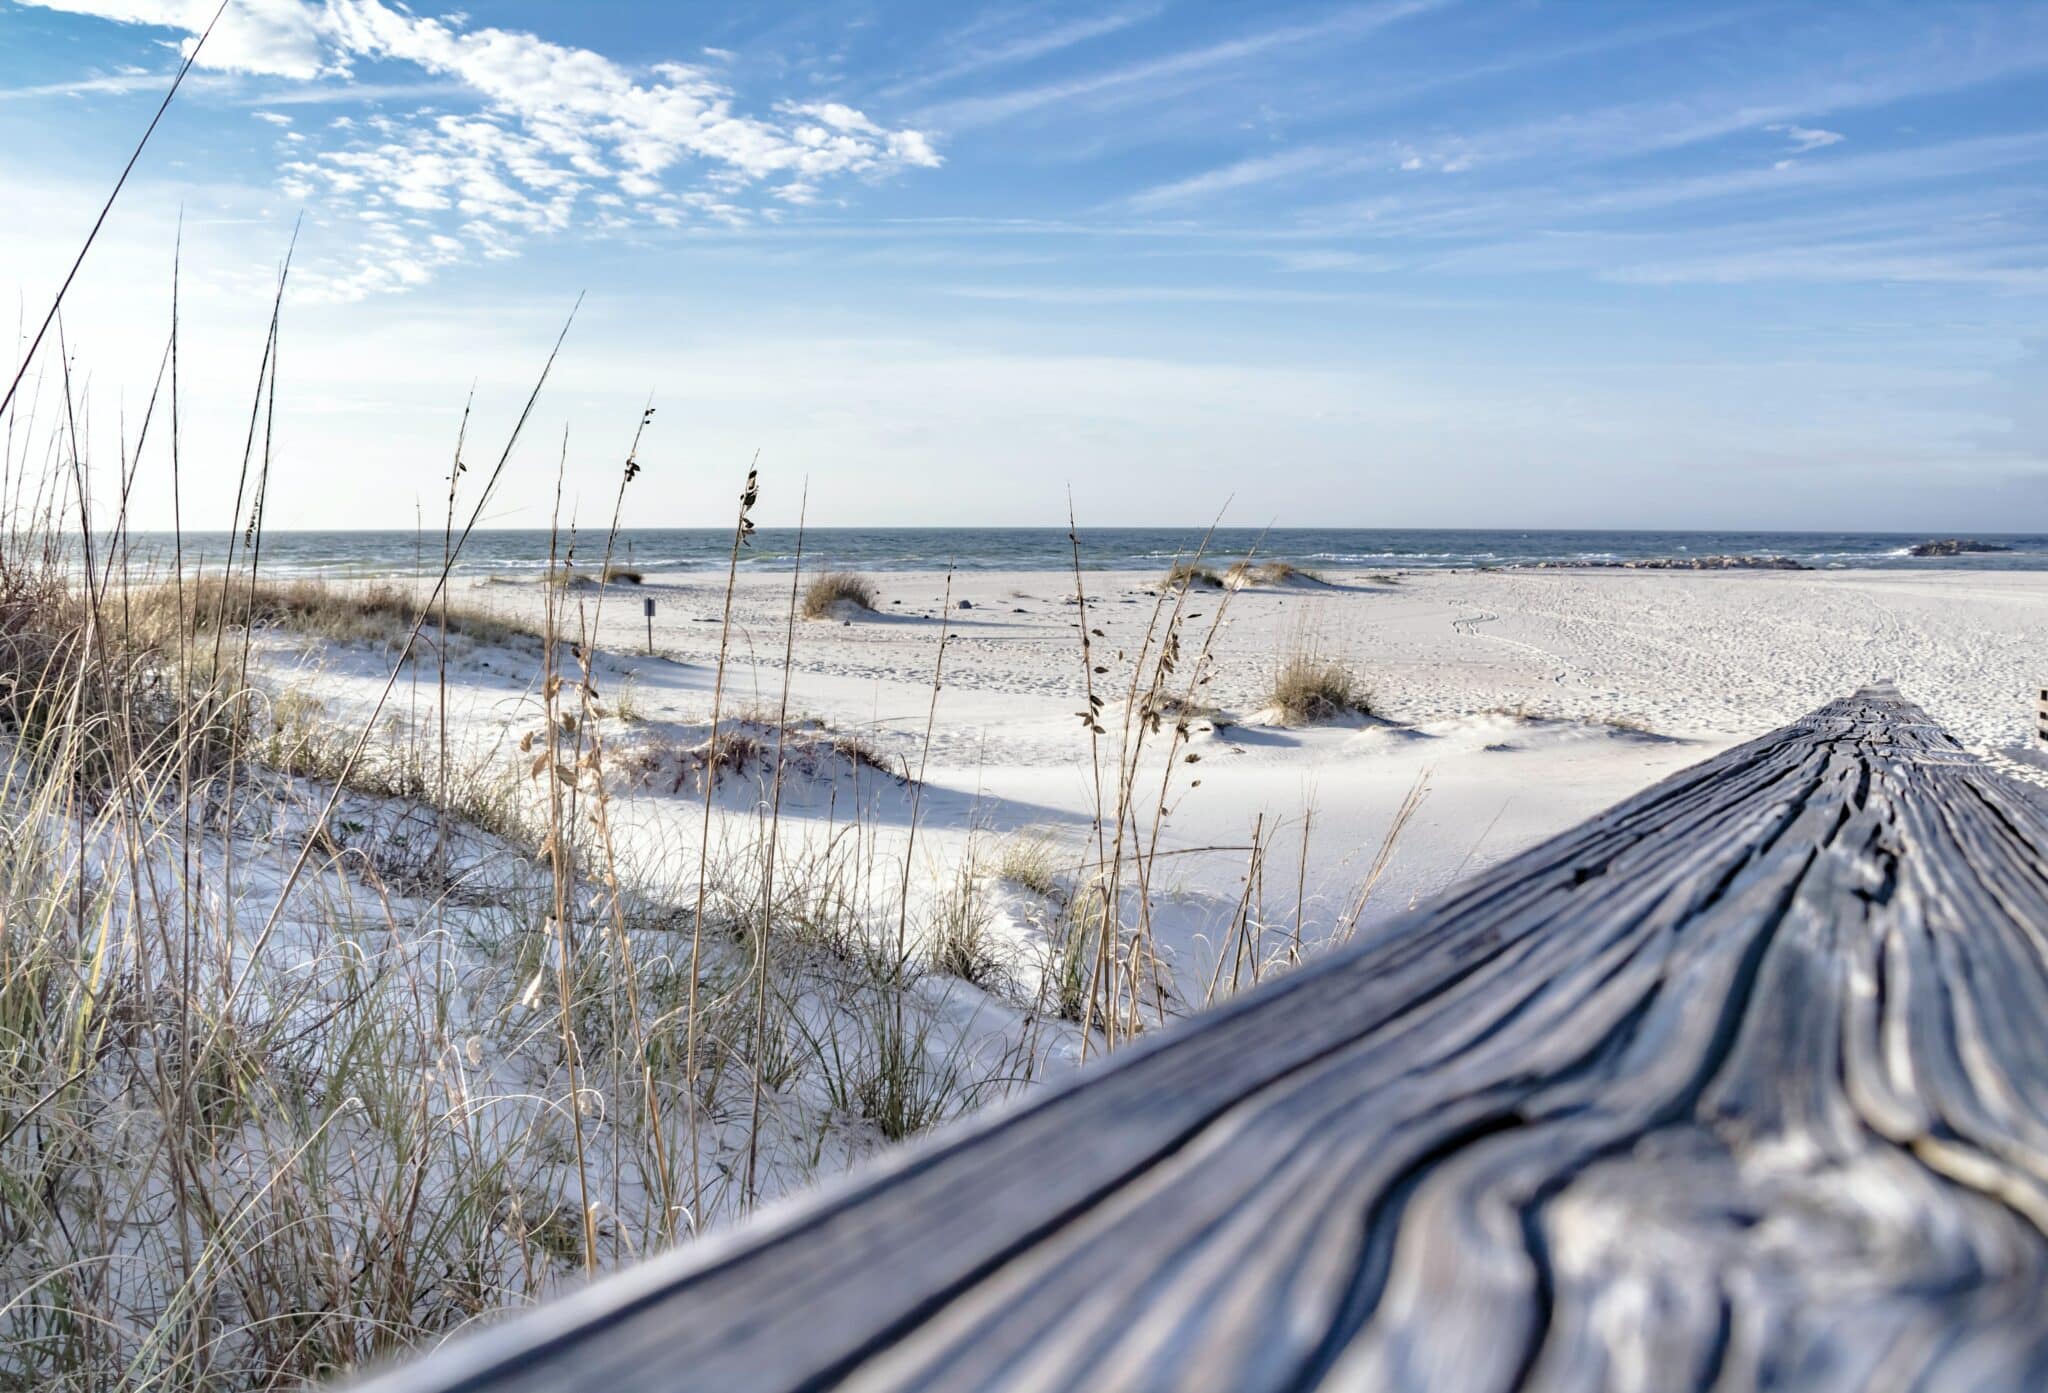 Pass in Orange Beach, Alabama, close to the Gulf Shores. Featuring white sands and a bright, blue sky